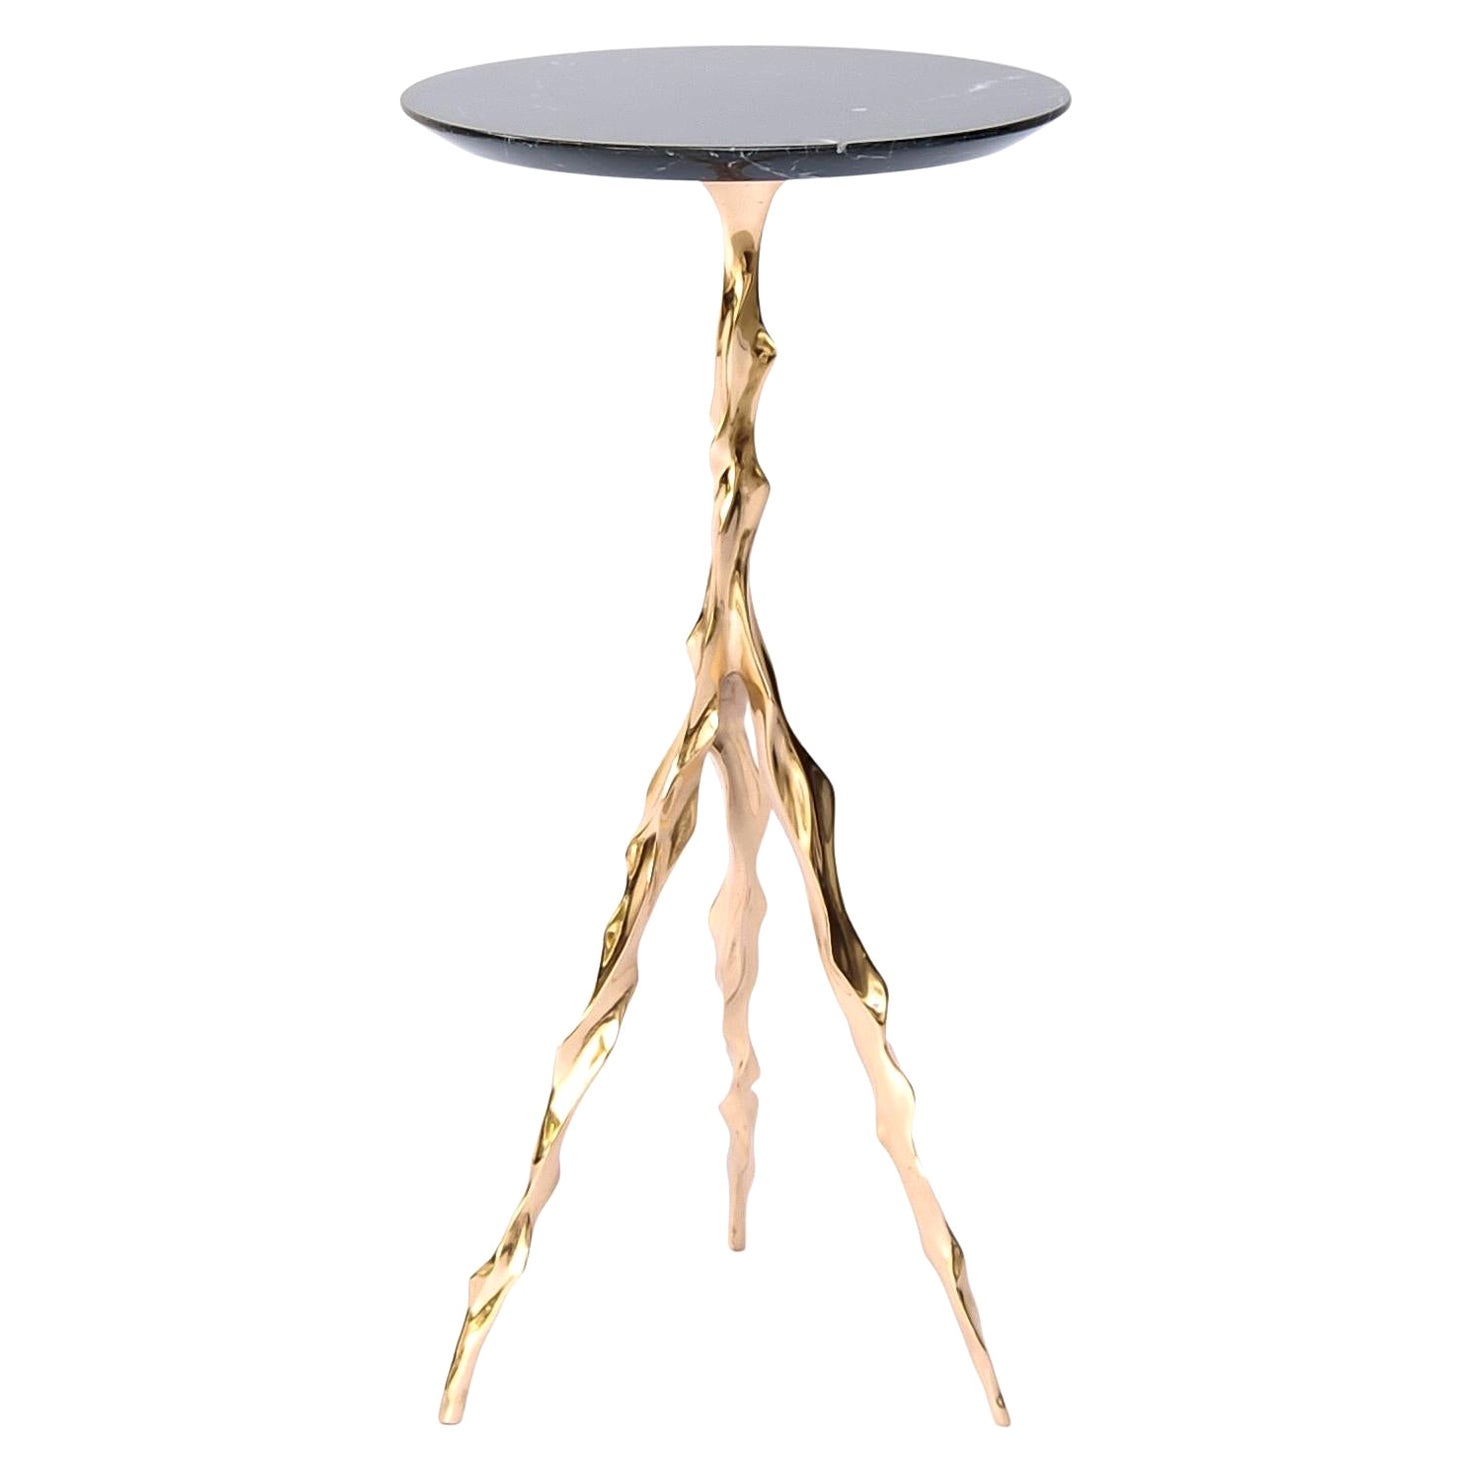 Etta Drink Table with Nero Marquina Marble Top by Fakasaka Design